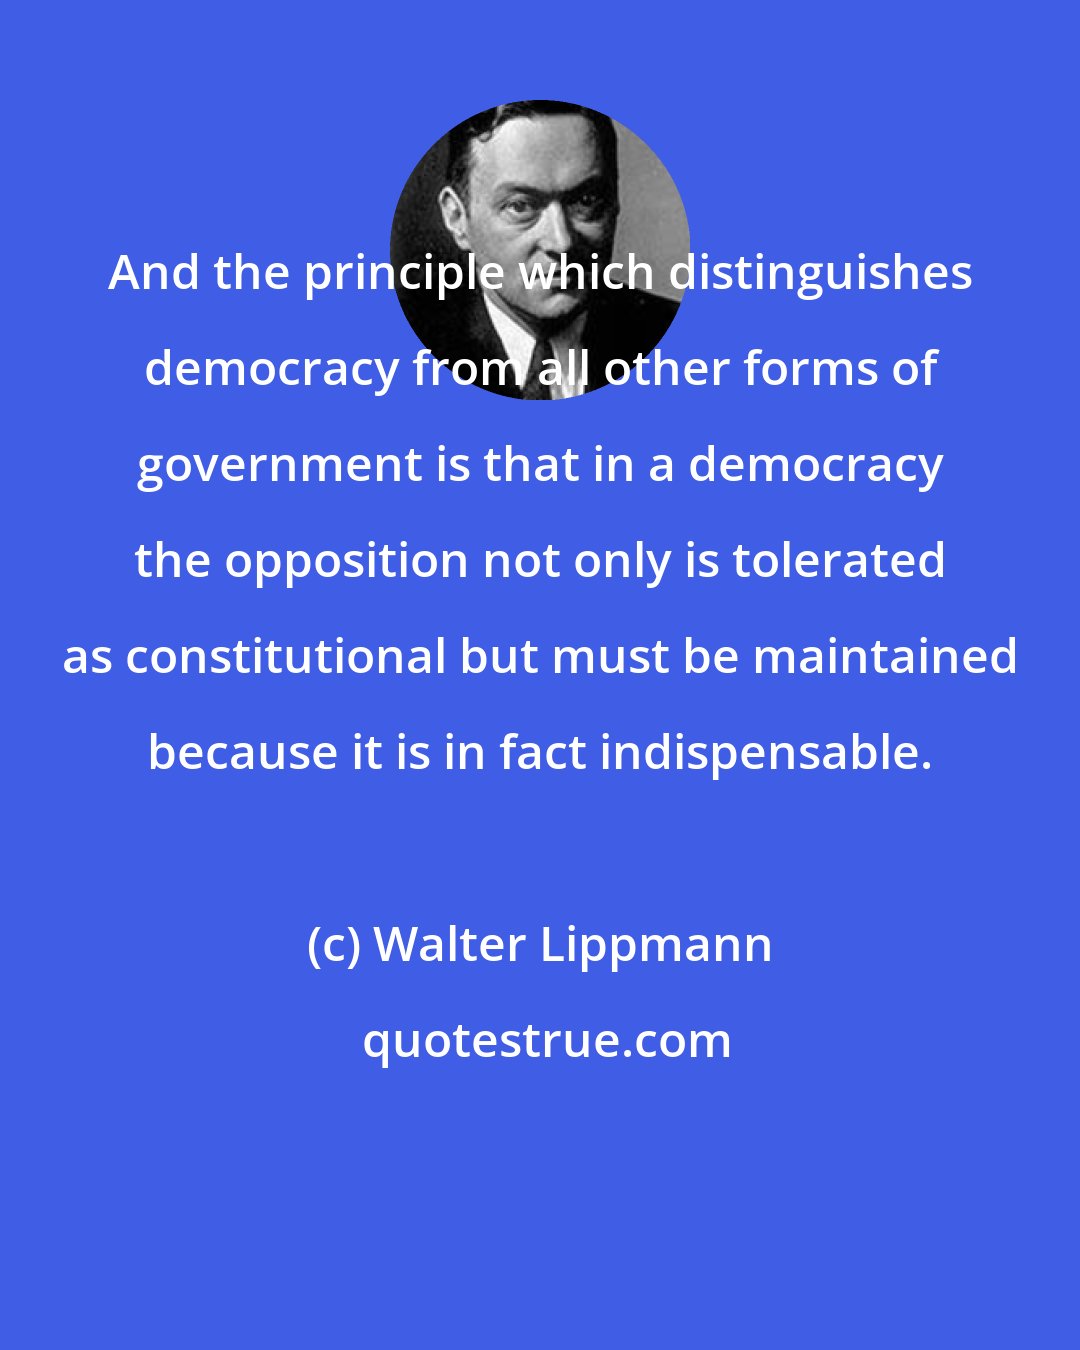 Walter Lippmann: And the principle which distinguishes democracy from all other forms of government is that in a democracy the opposition not only is tolerated as constitutional but must be maintained because it is in fact indispensable.